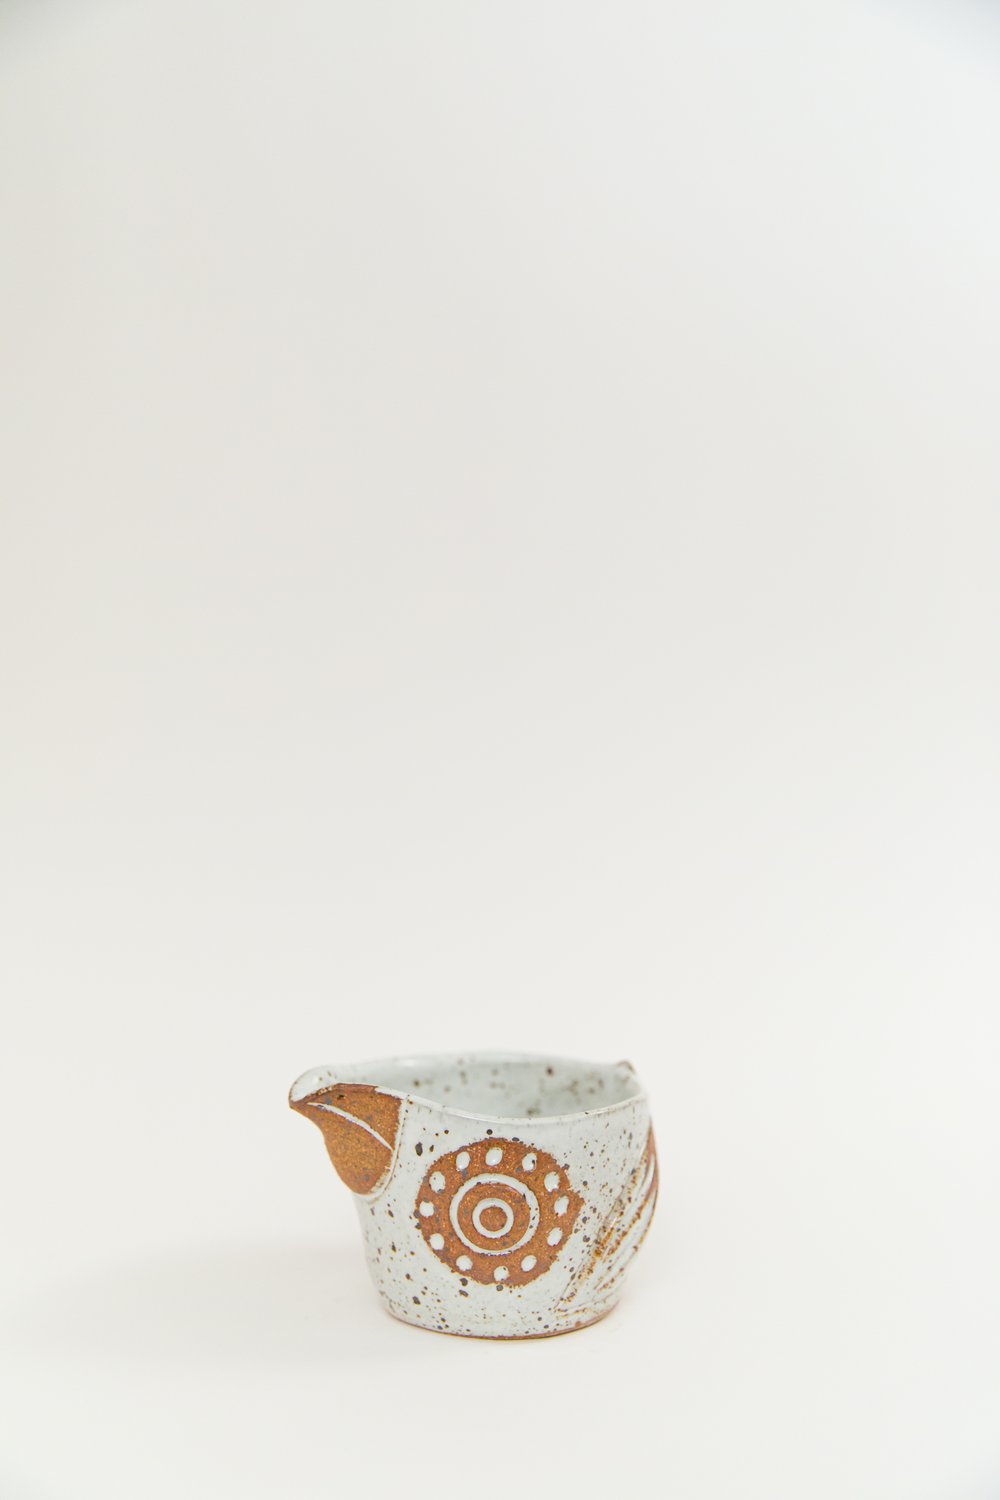 Image of Glossy White with Dotted Owl Eye Bird Bowl